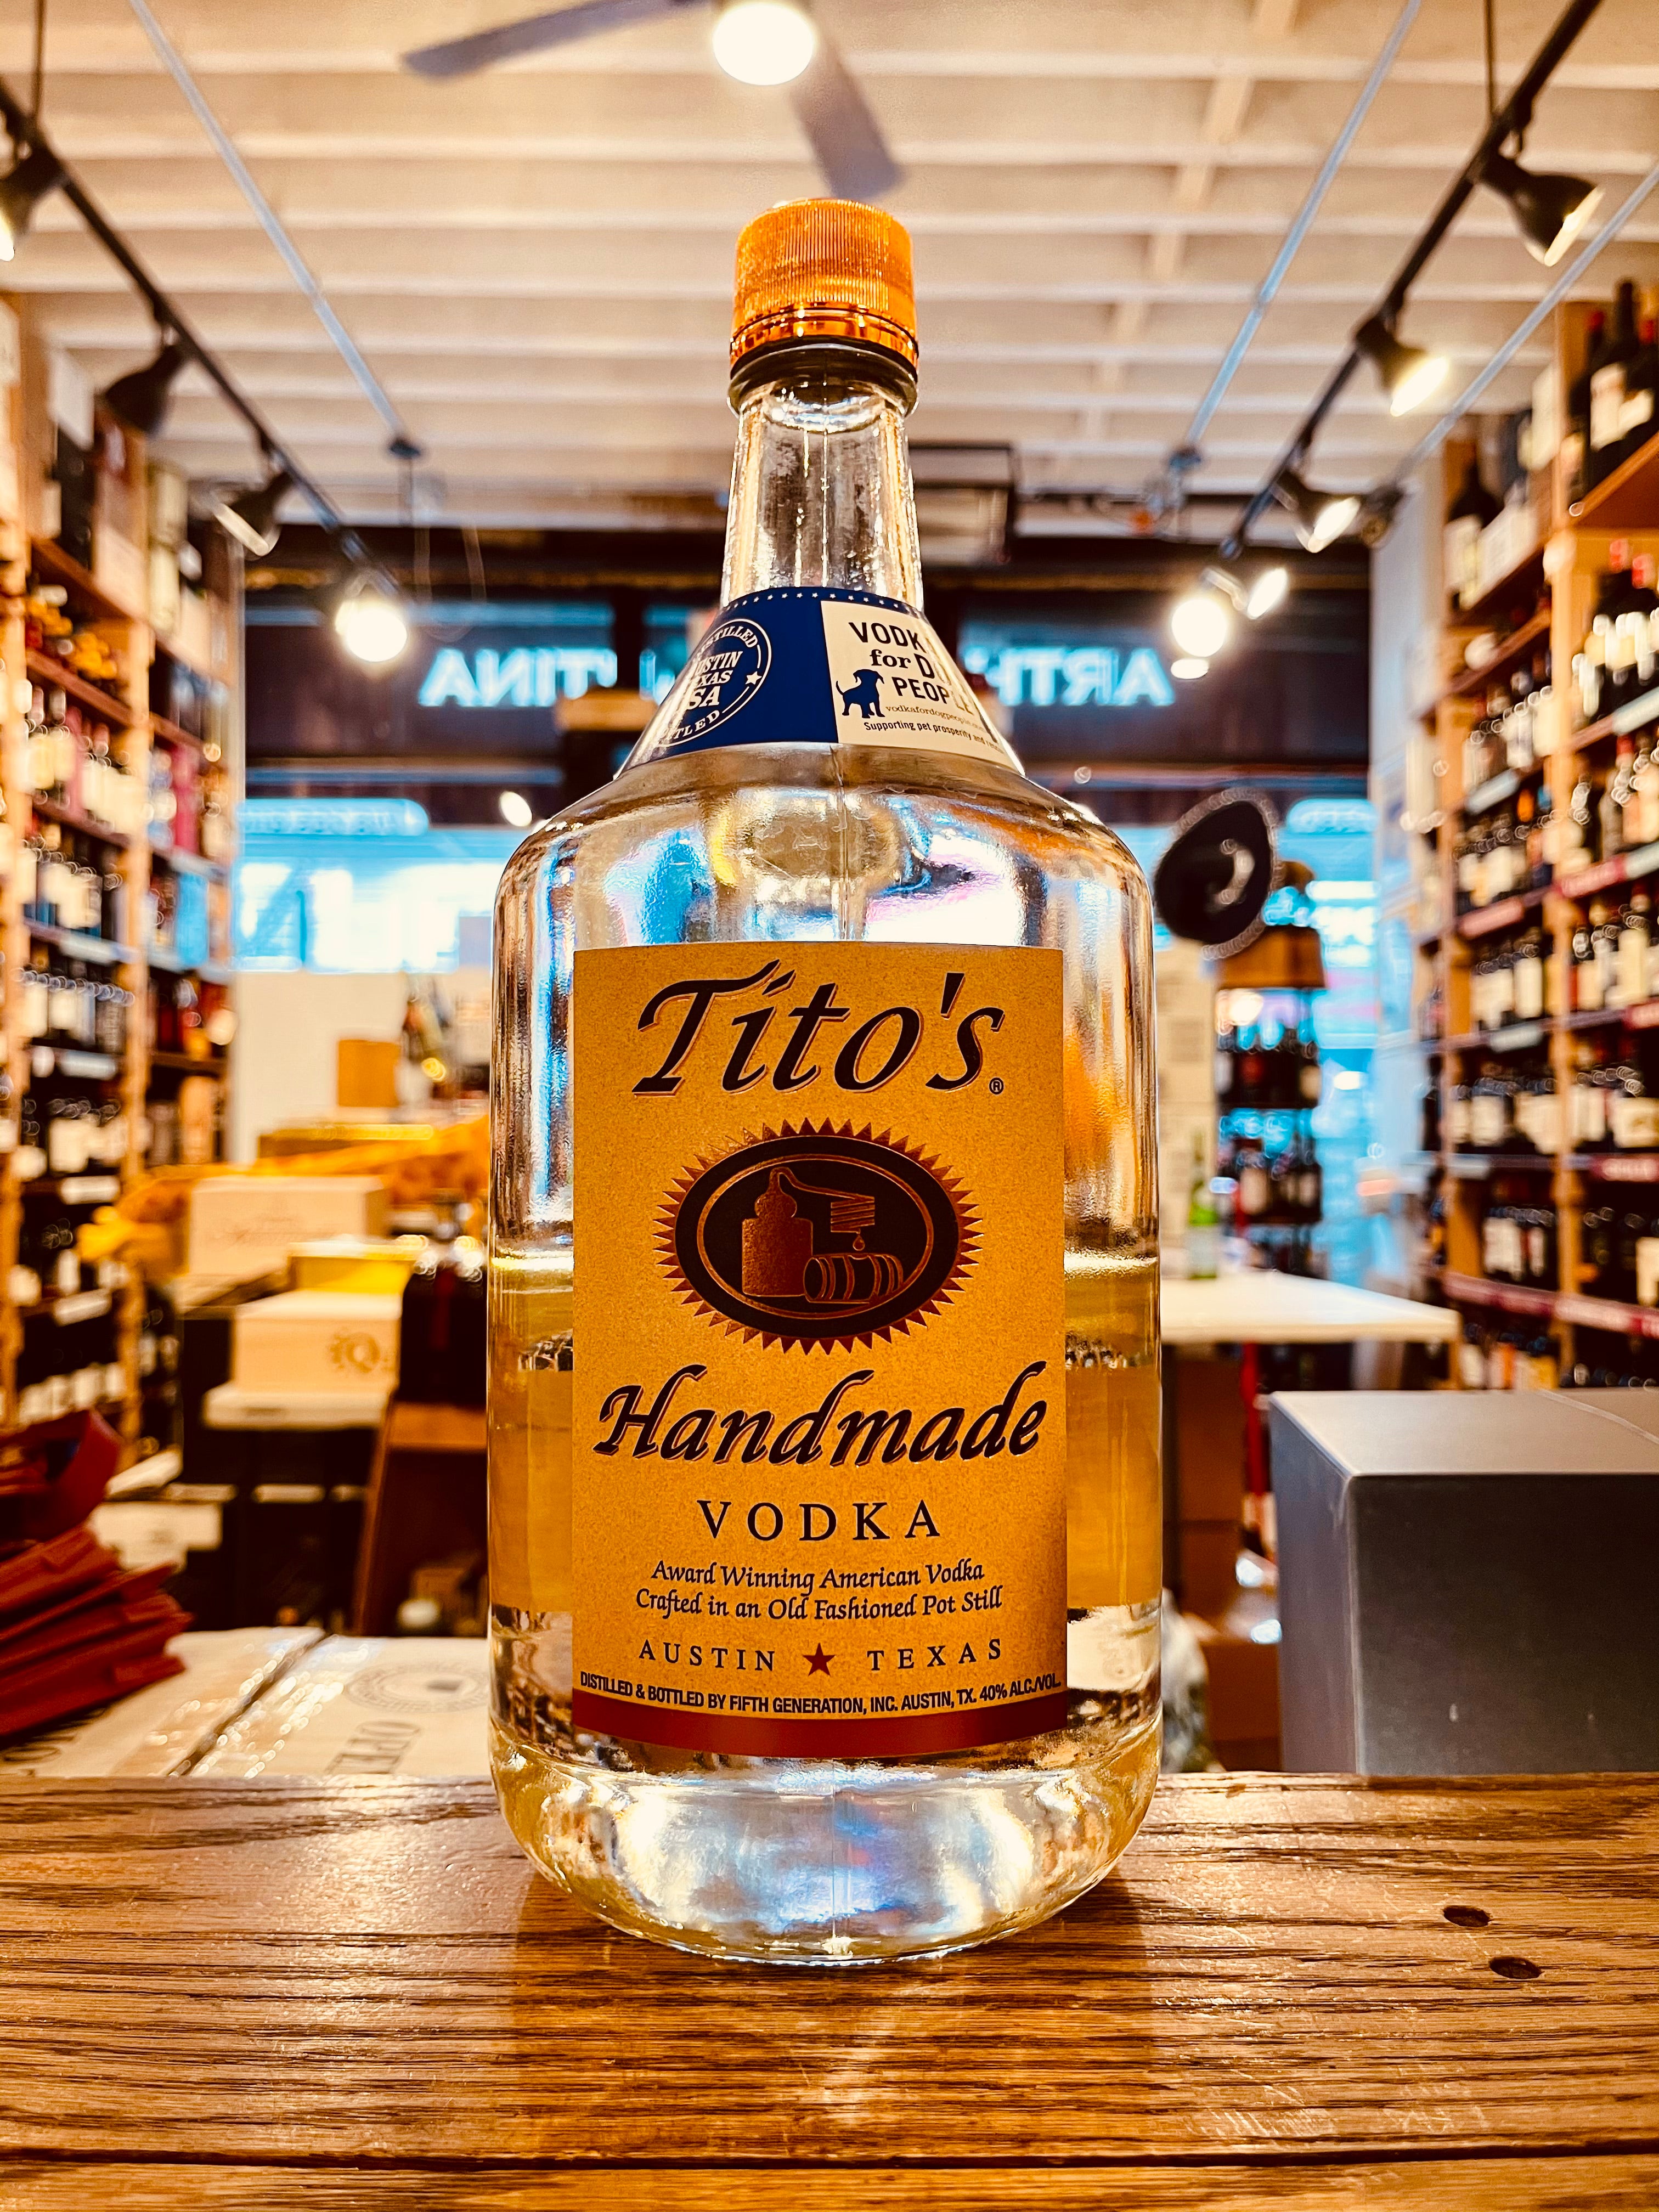 Tito's Handmade 1.75L Vodka a large glass robust clear bottle with a yellow label and a golden top